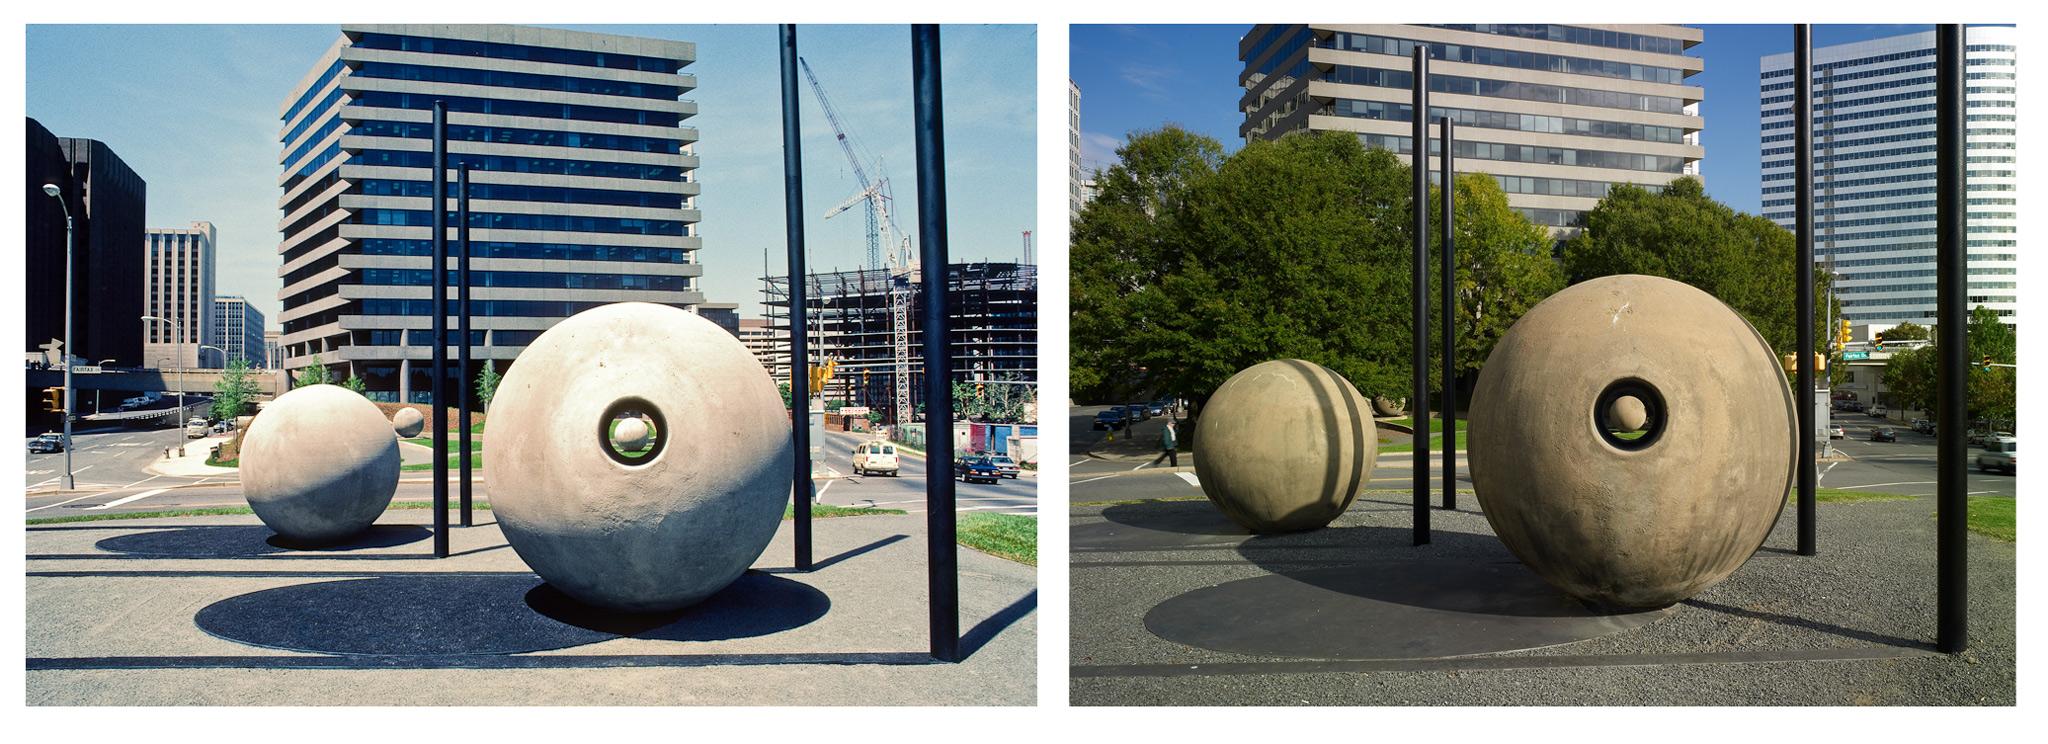 two images of large concrete spheres in an urban park